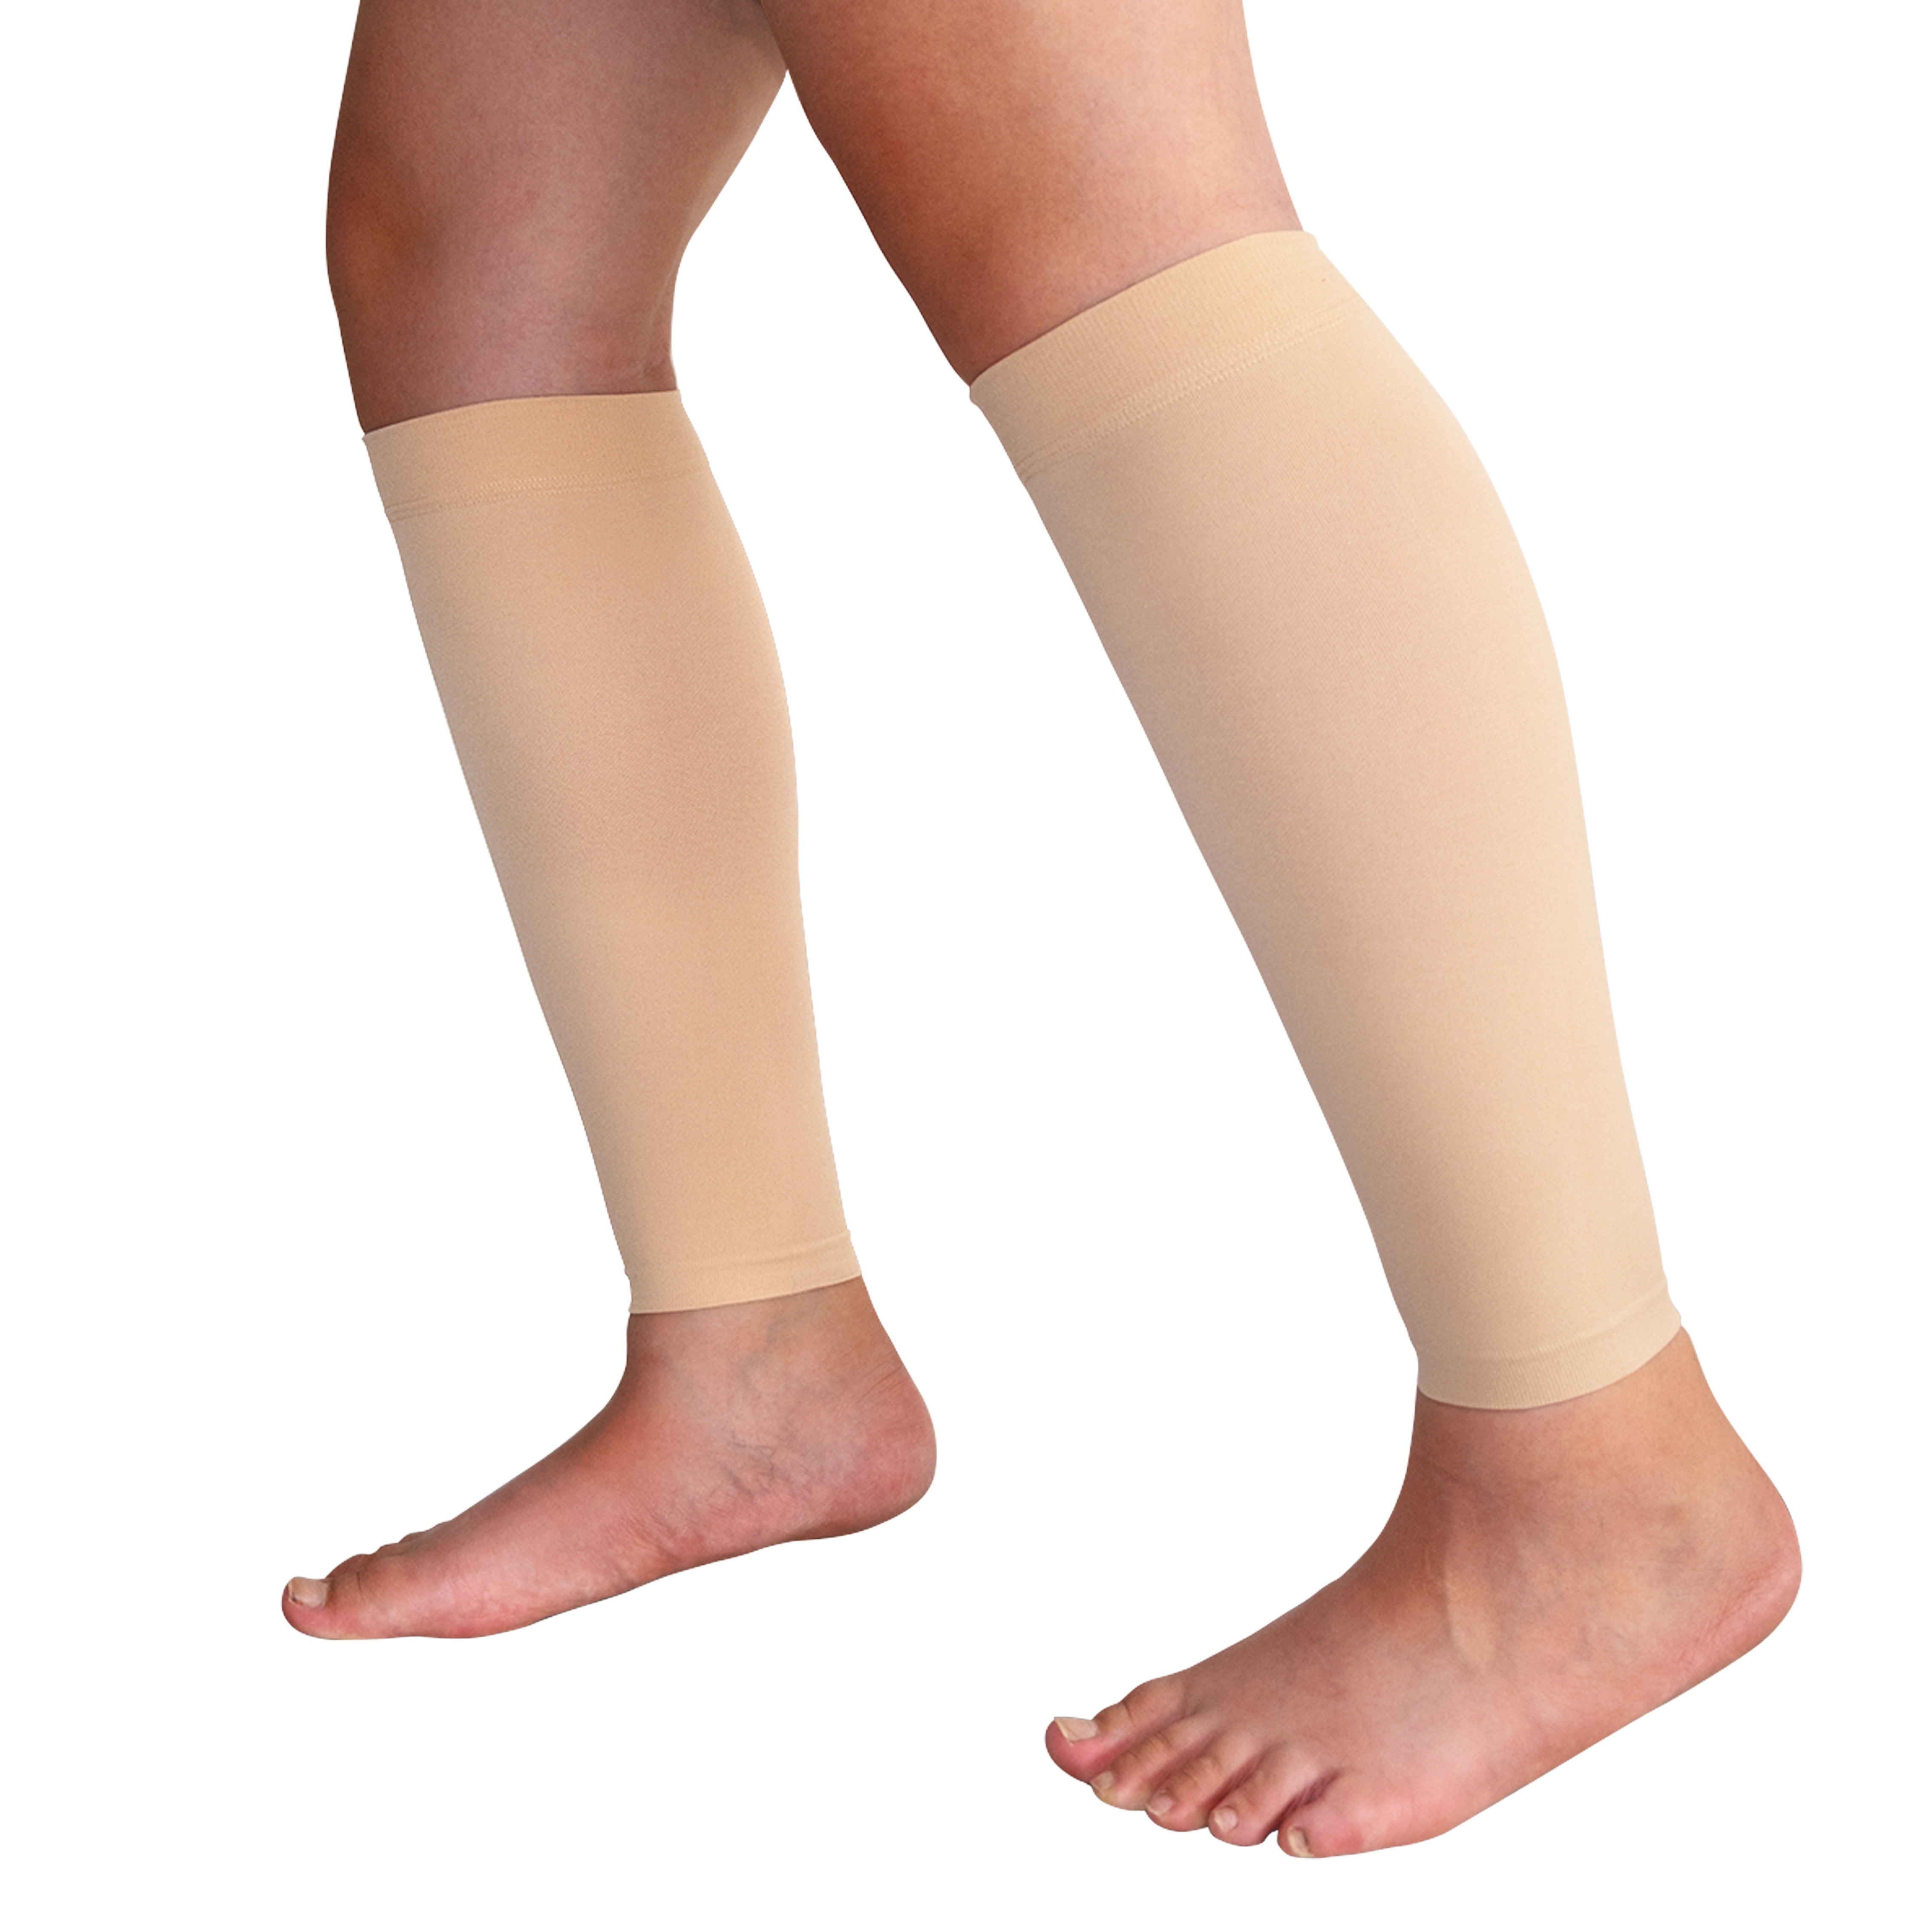 Calf Compression Sleeve Ankle Brace Leg Support Socks Foot